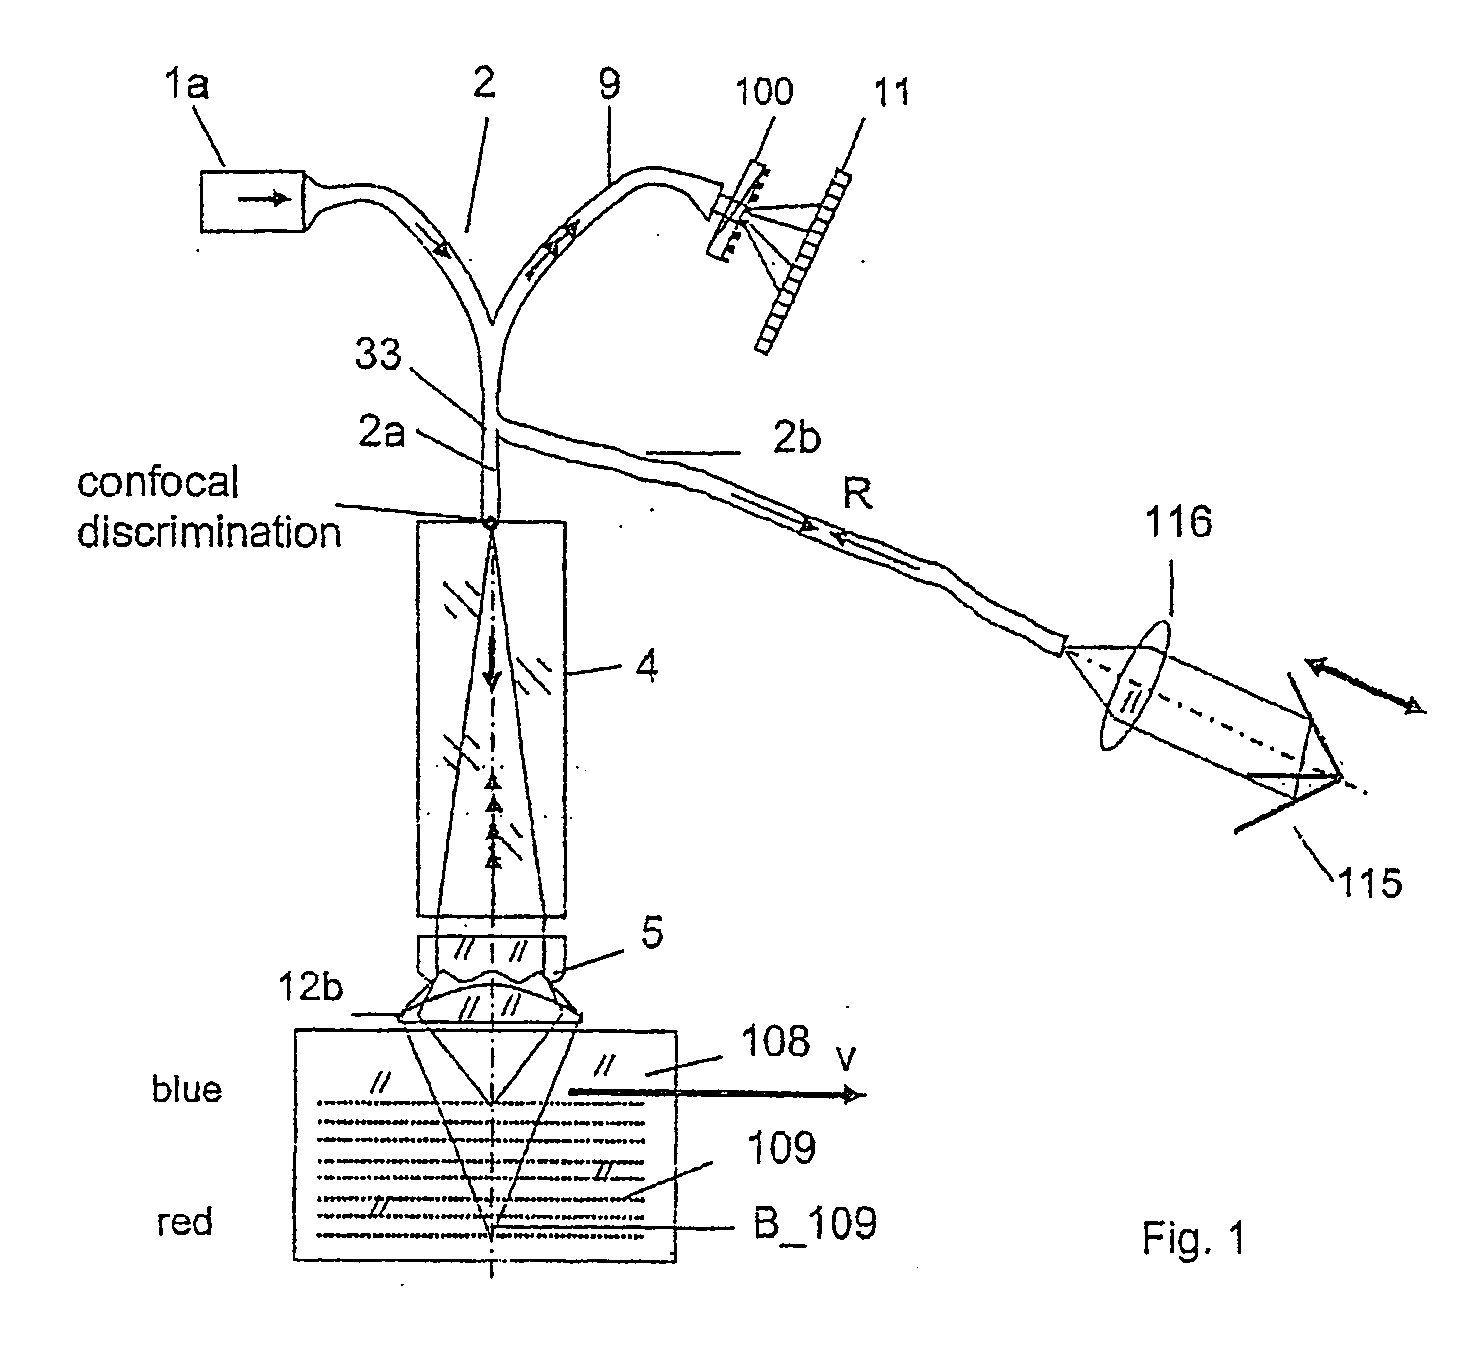 Method and Assembly for Confocal, Chromatic, Interferometric and Spectroscopic Scanning of Optical, Multi-Layer Data Memories